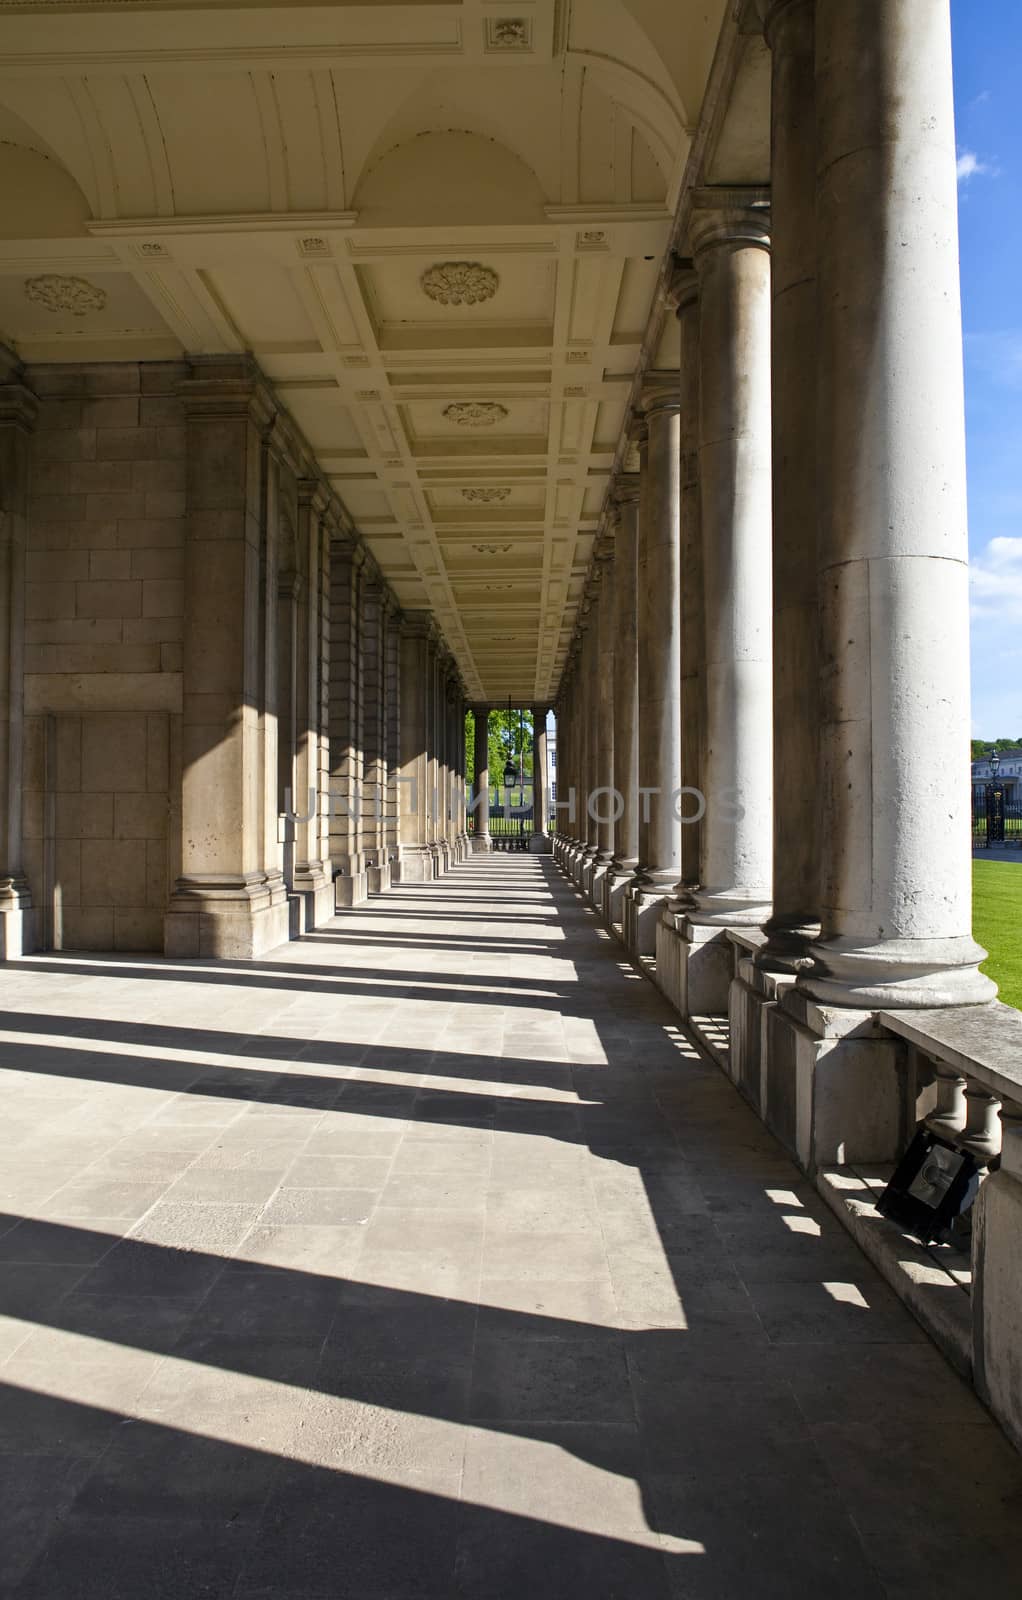 The walkways at the Royal Naval College in Greenwich, London.